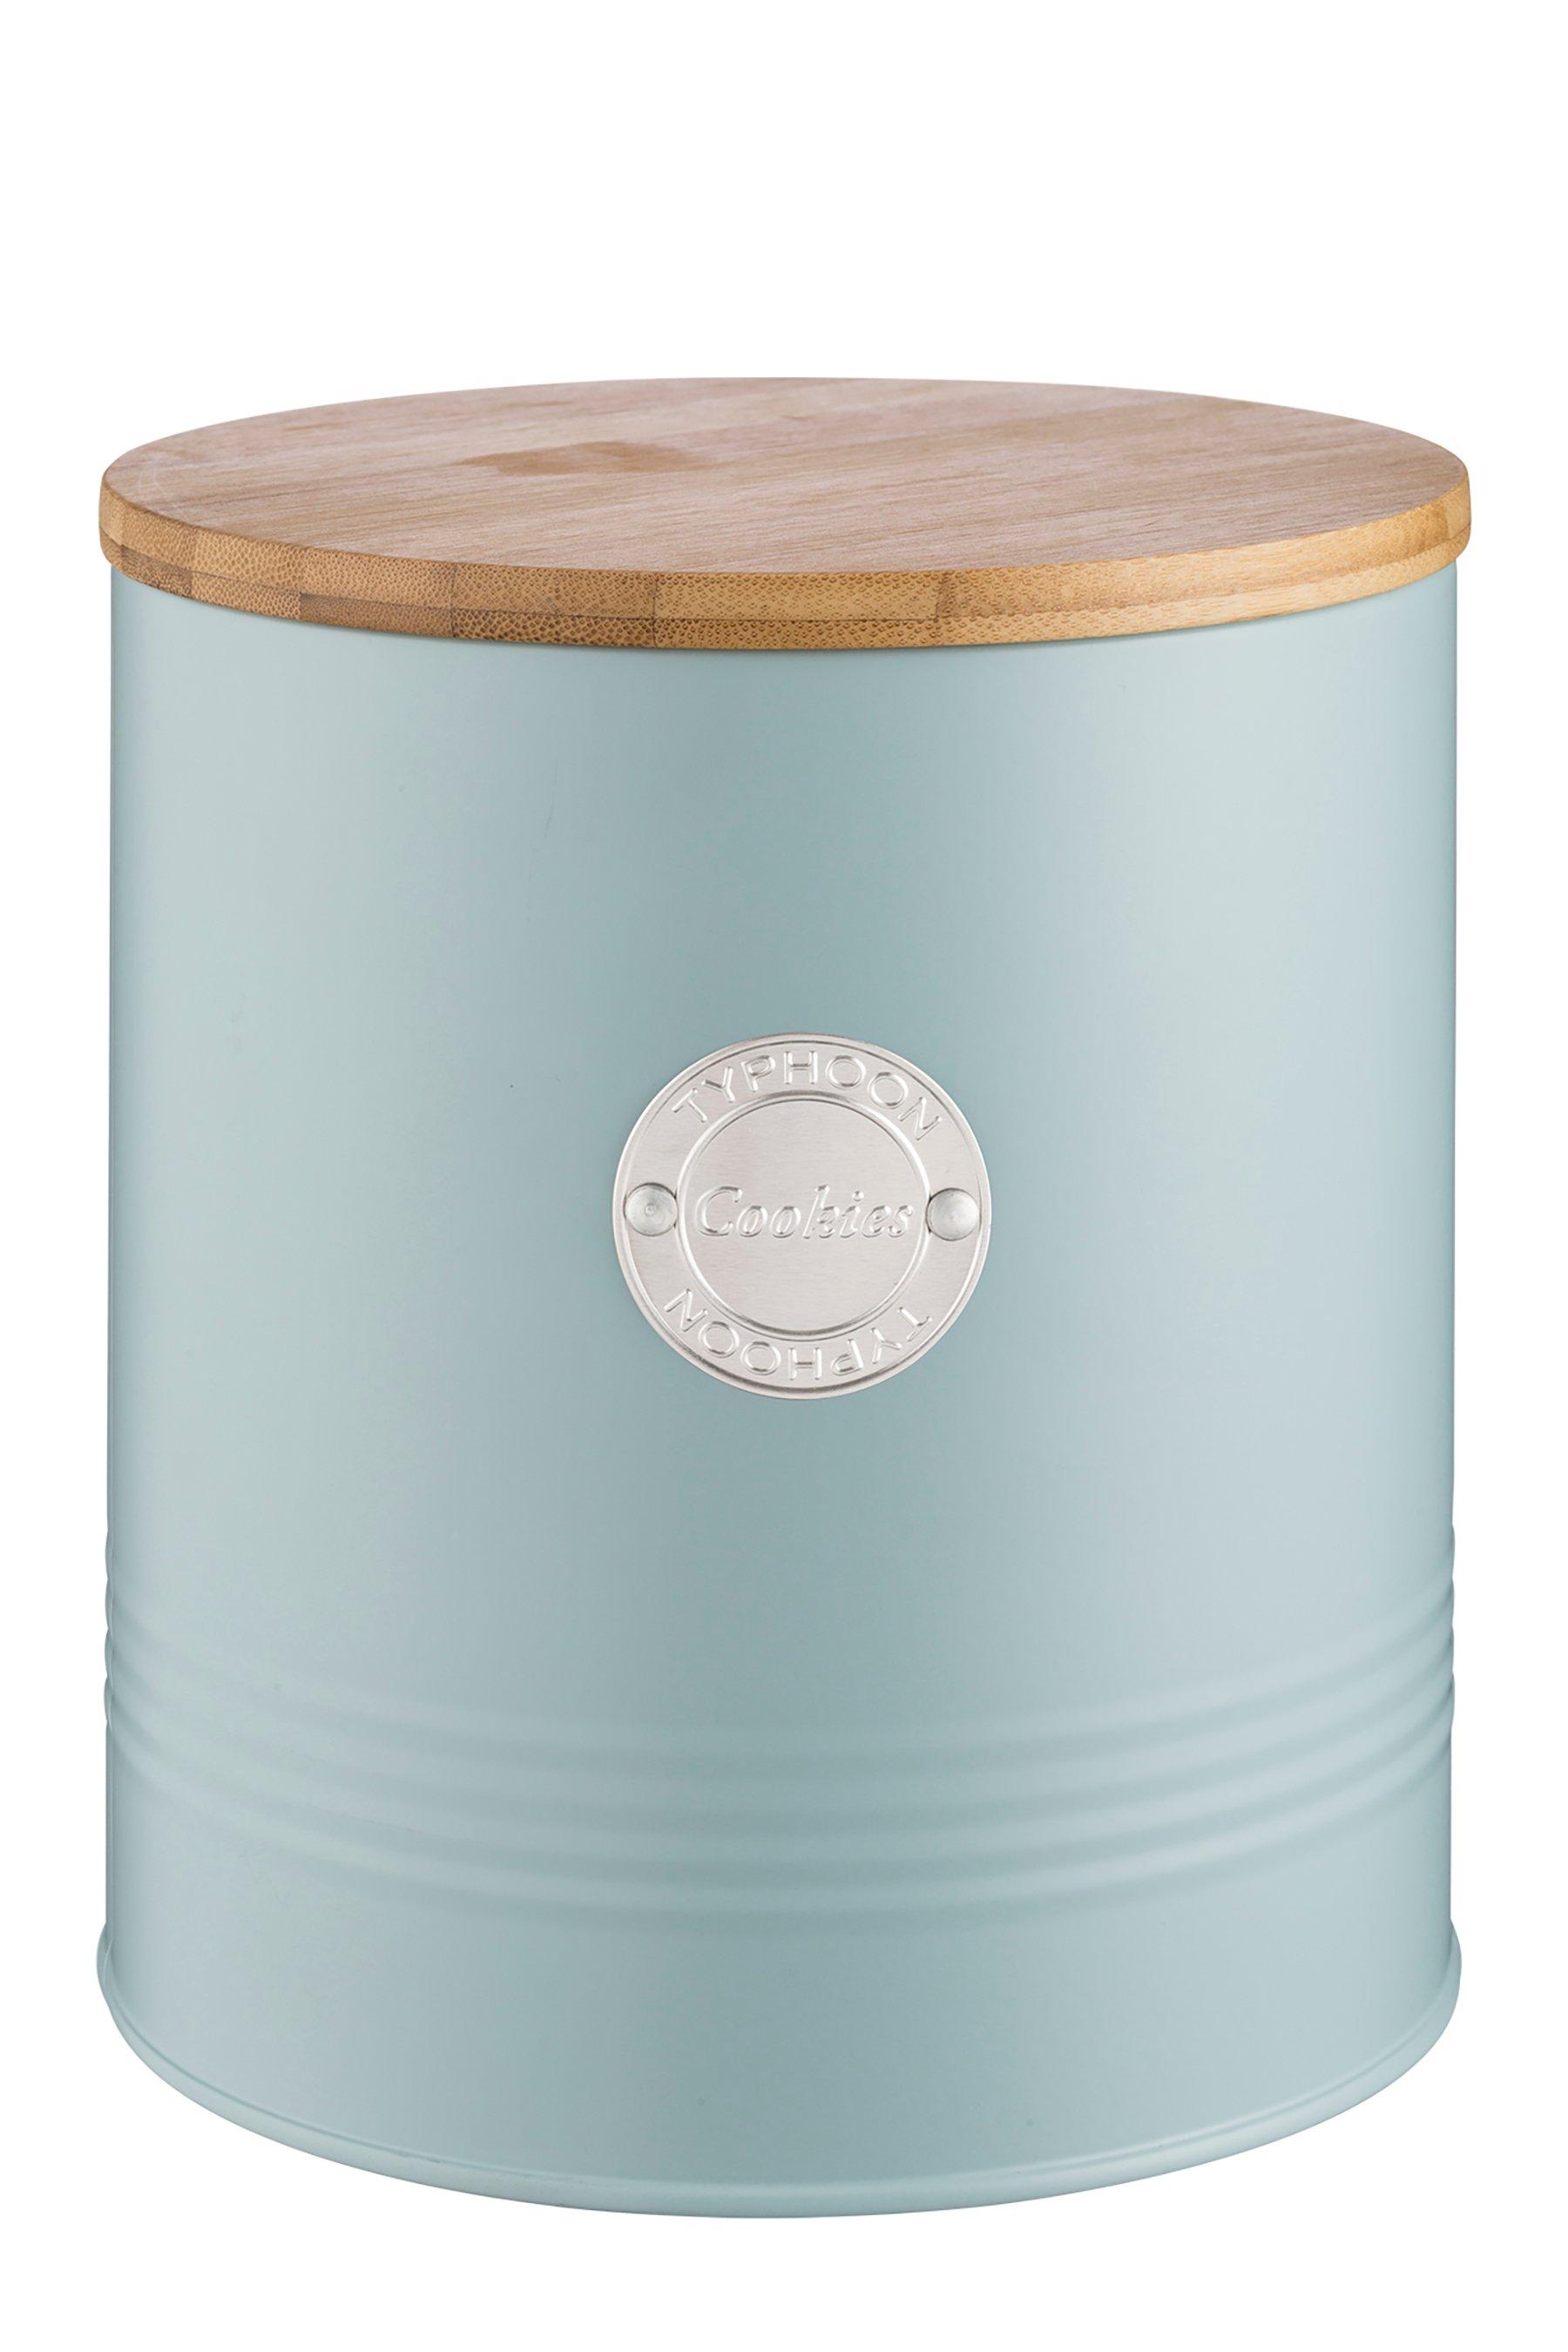 typhoon living biscuit canister - blue